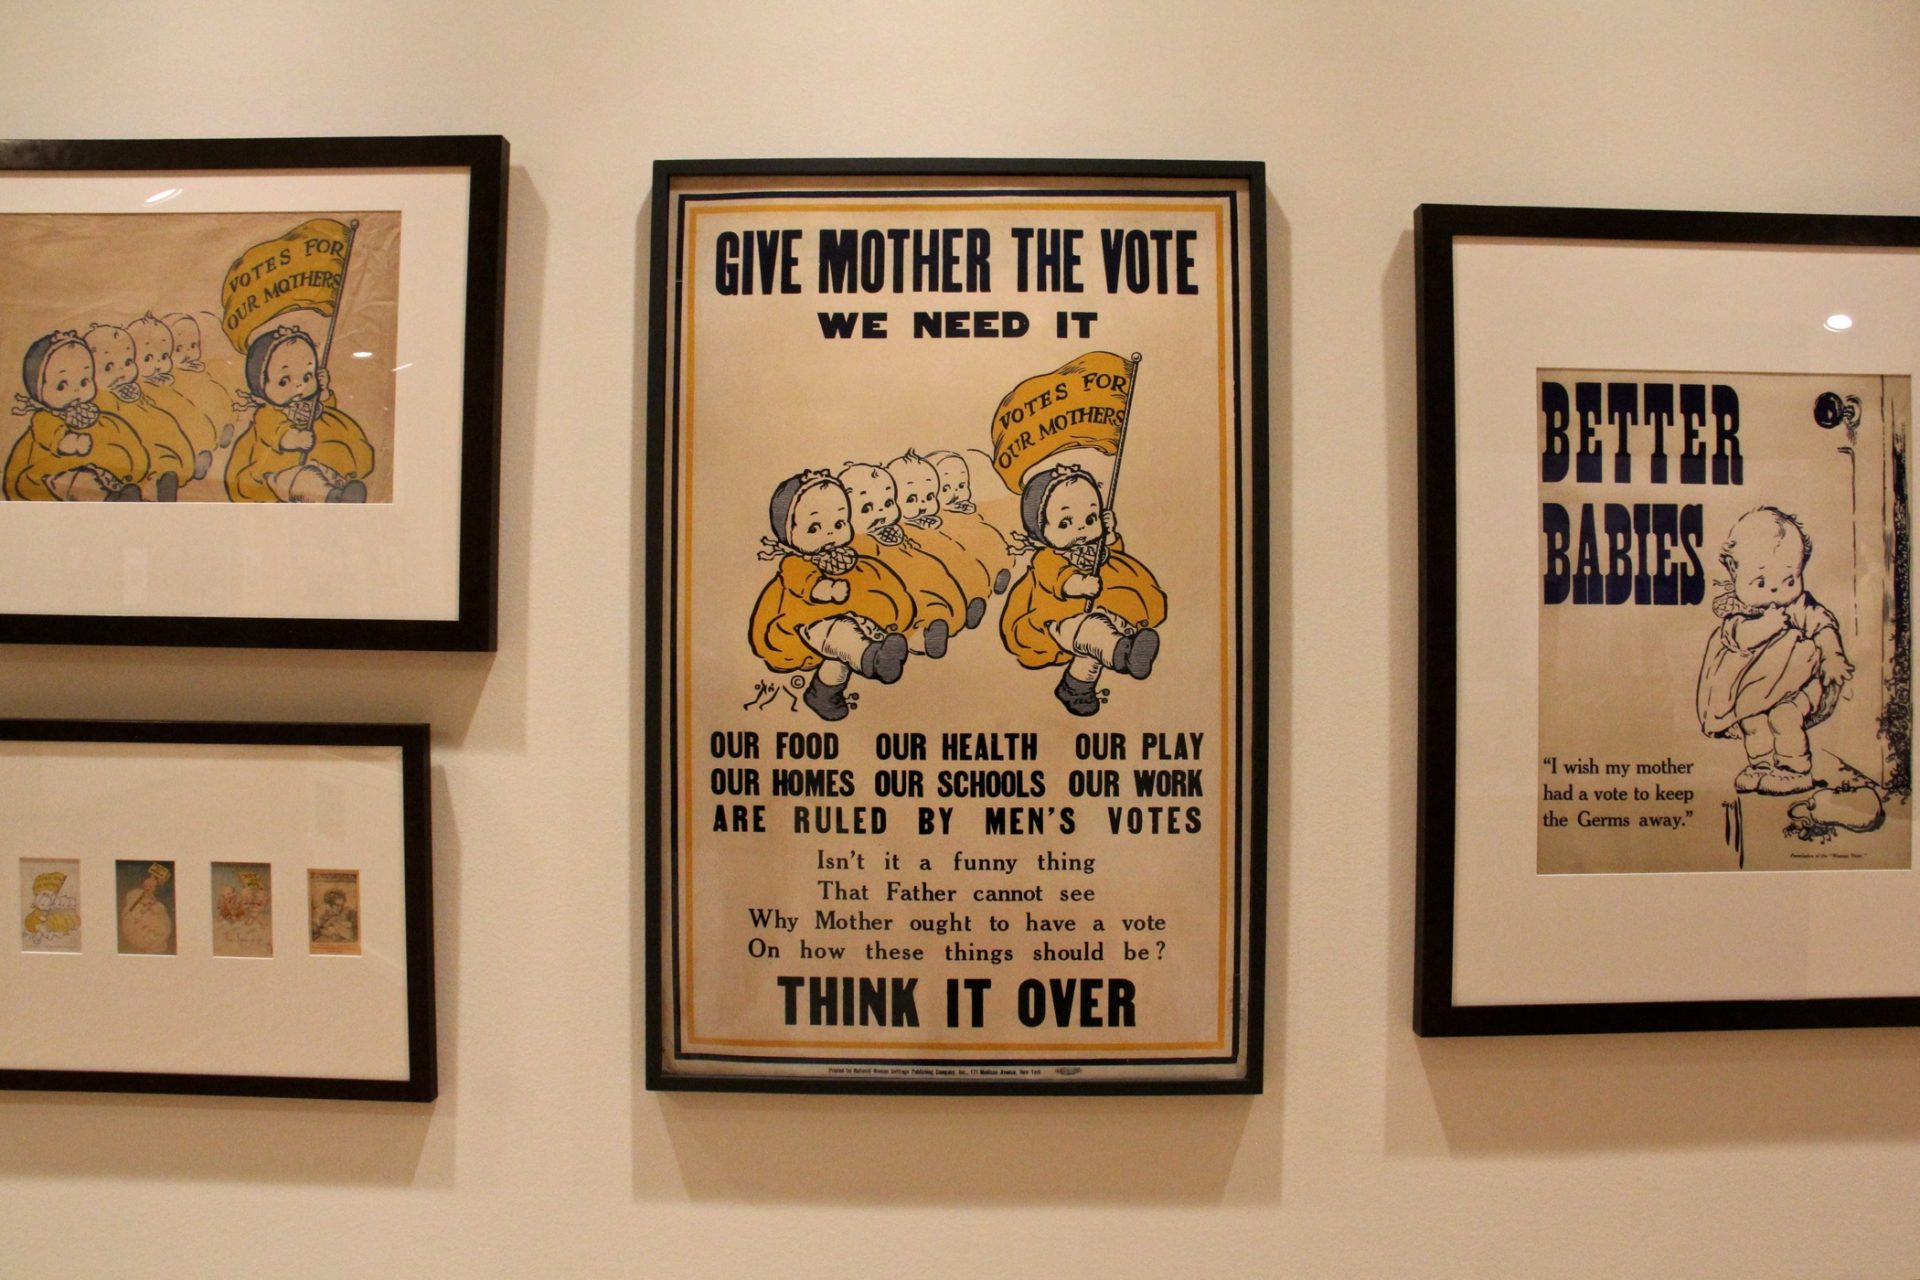 Artist Rose O’Neill used her popular “Kewpie” babies to promote women’s suffrage.